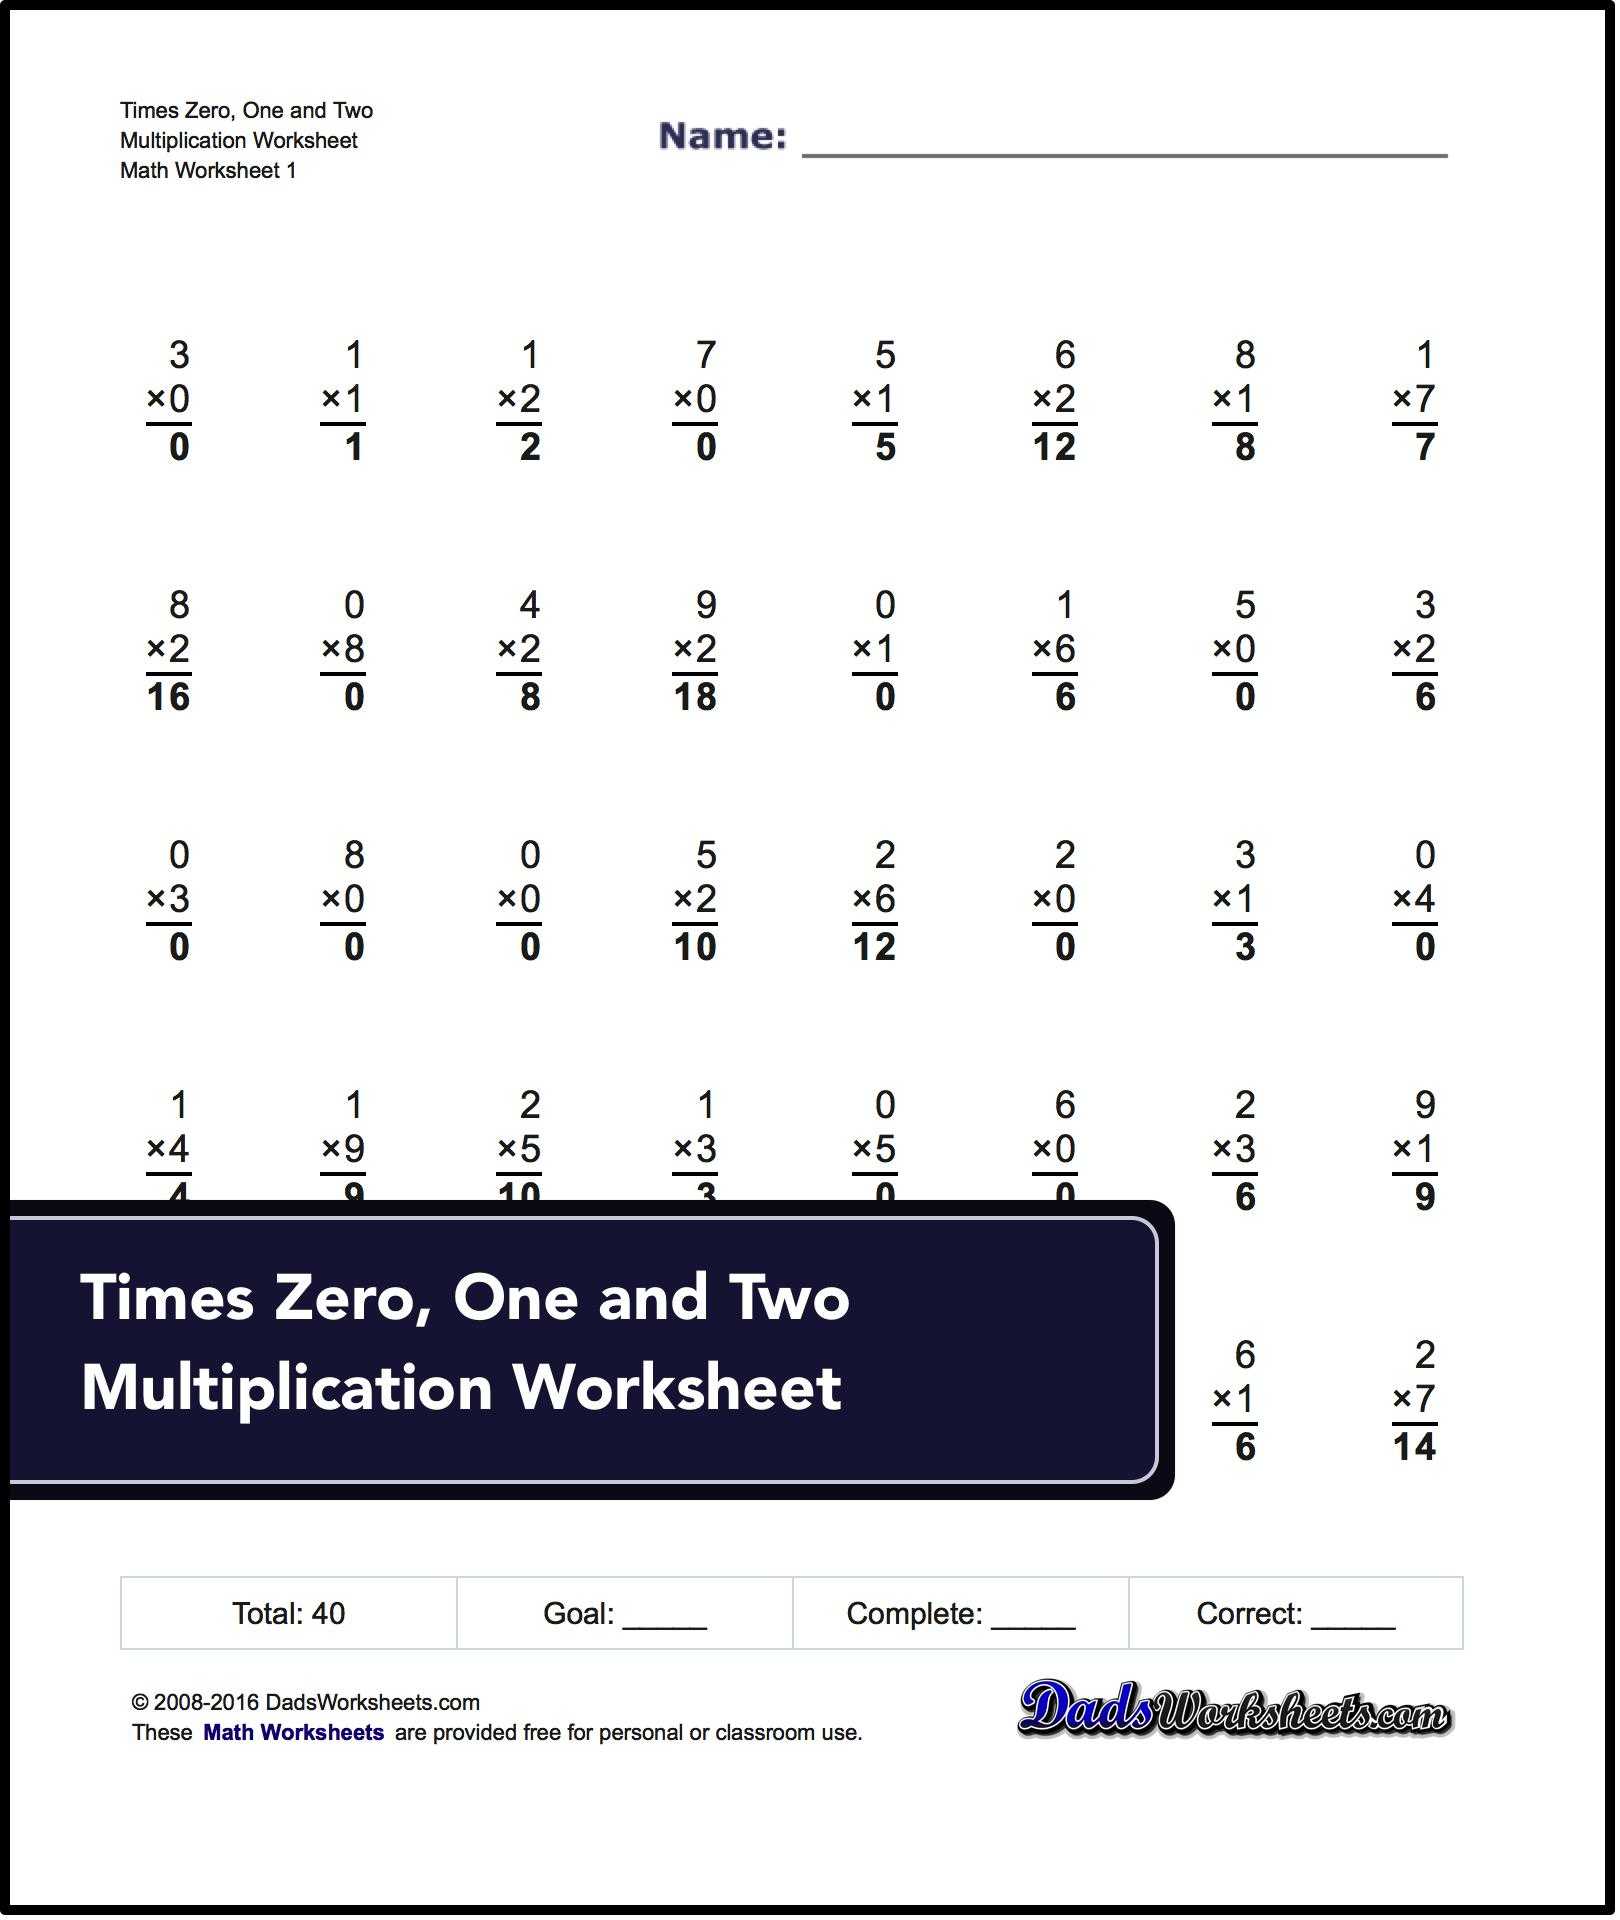 7th Grade Common Core Math Worksheets with Answer Key and Basic Math Skills Worksheets